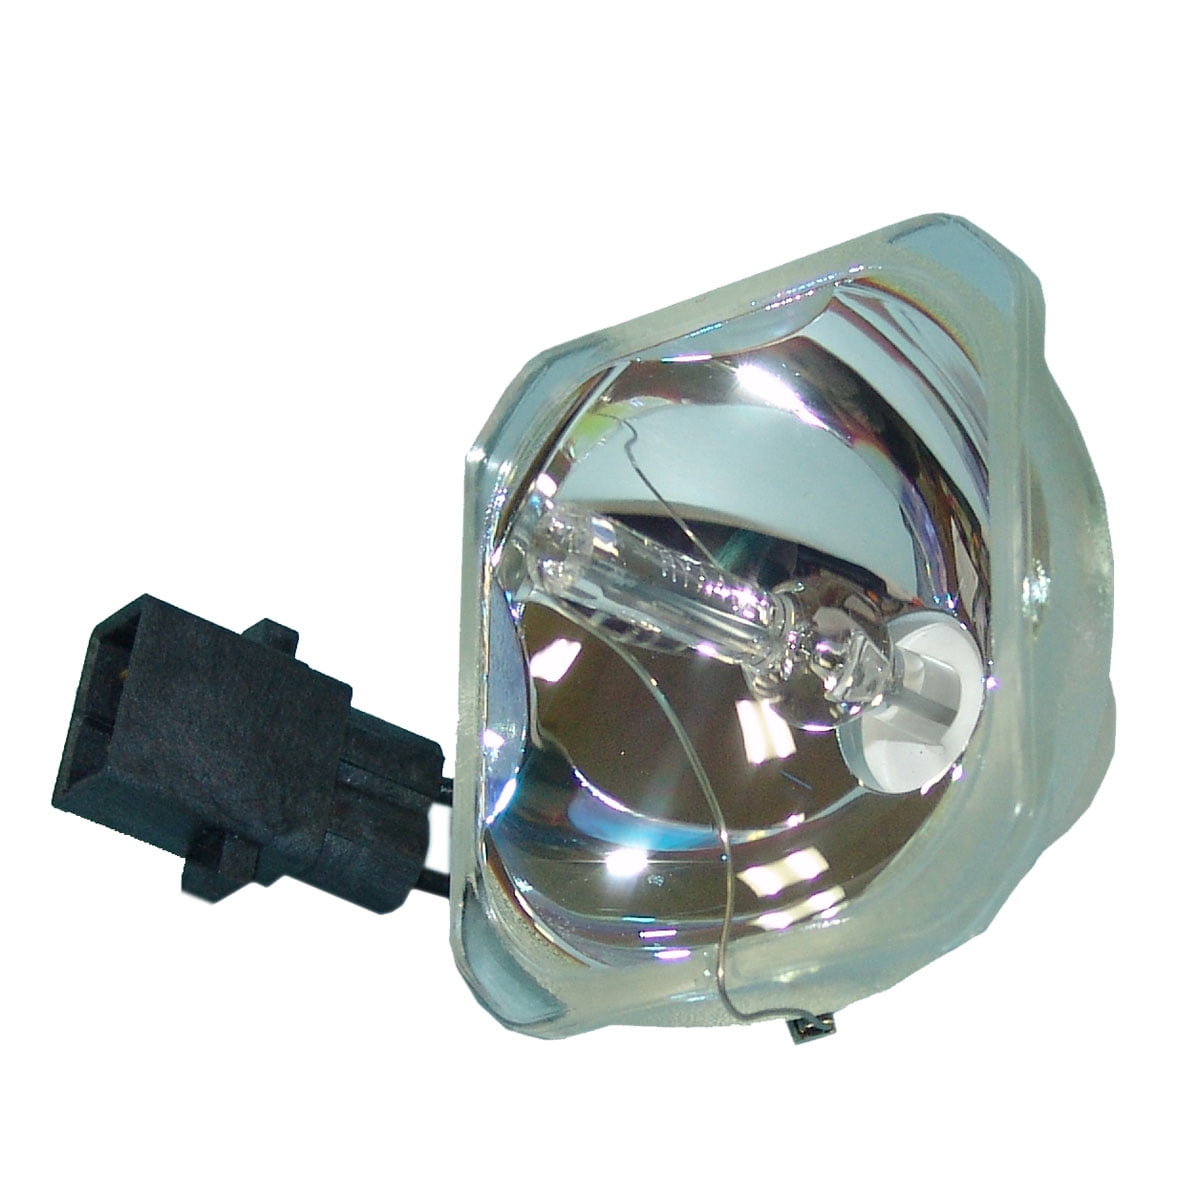 Lutema Economy for Epson ELPLP58 Projector Lamp with Housing